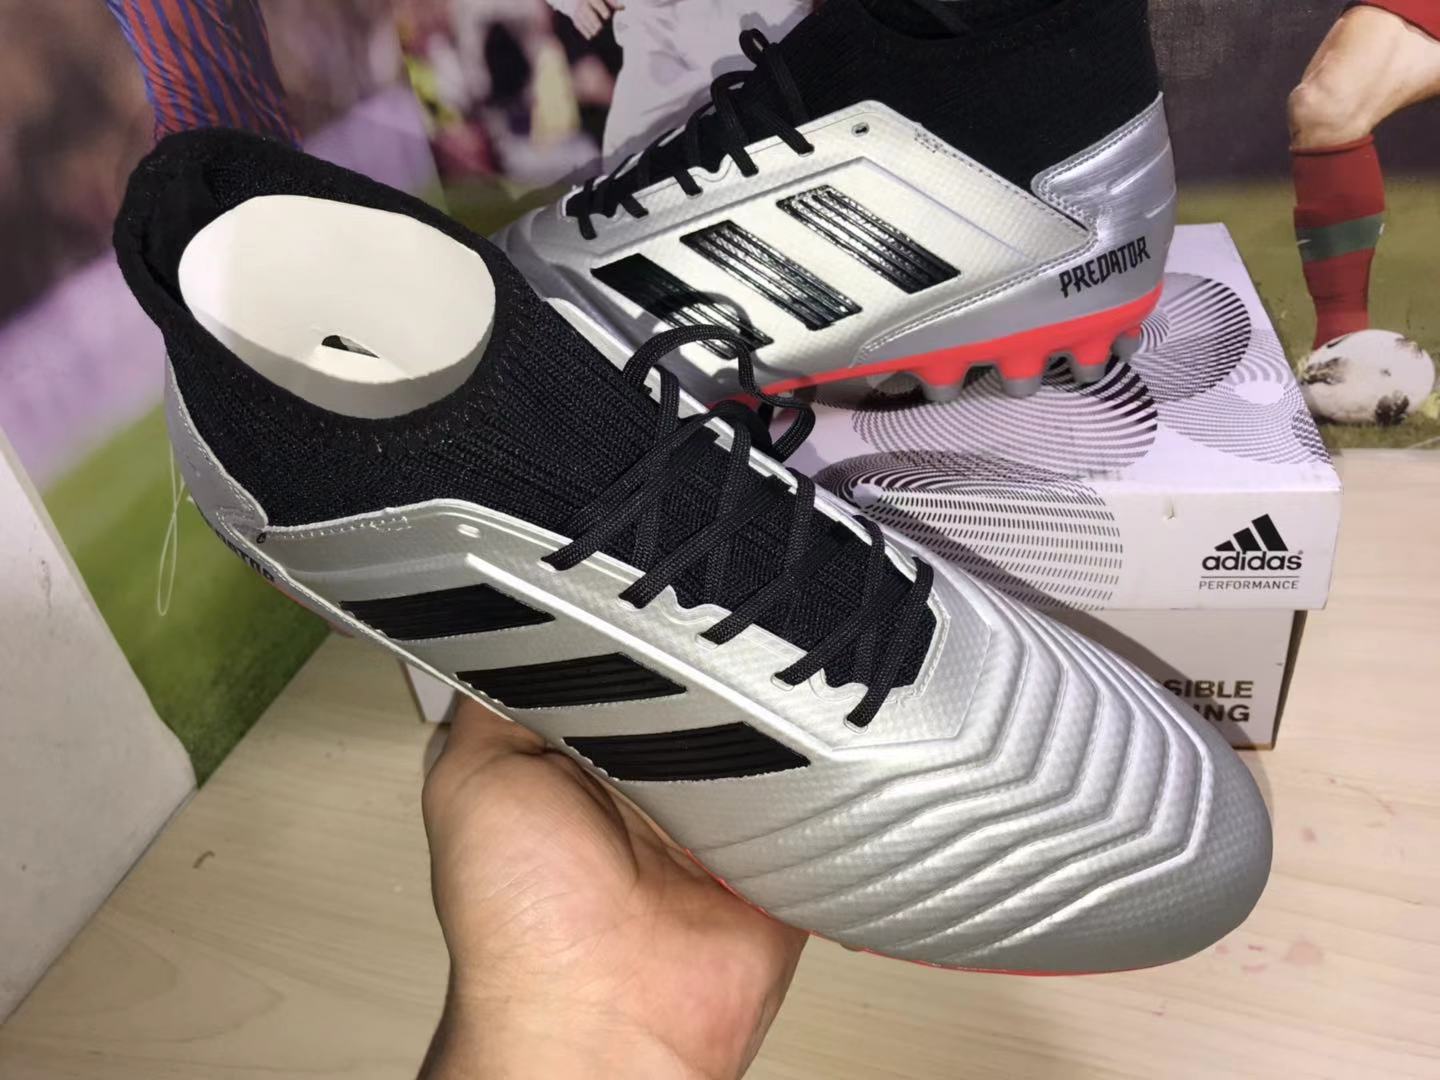 Adidas Predator 19.3 AG Silver F99989 - Ideal Soccer Cleats for Aggressive Gameplay